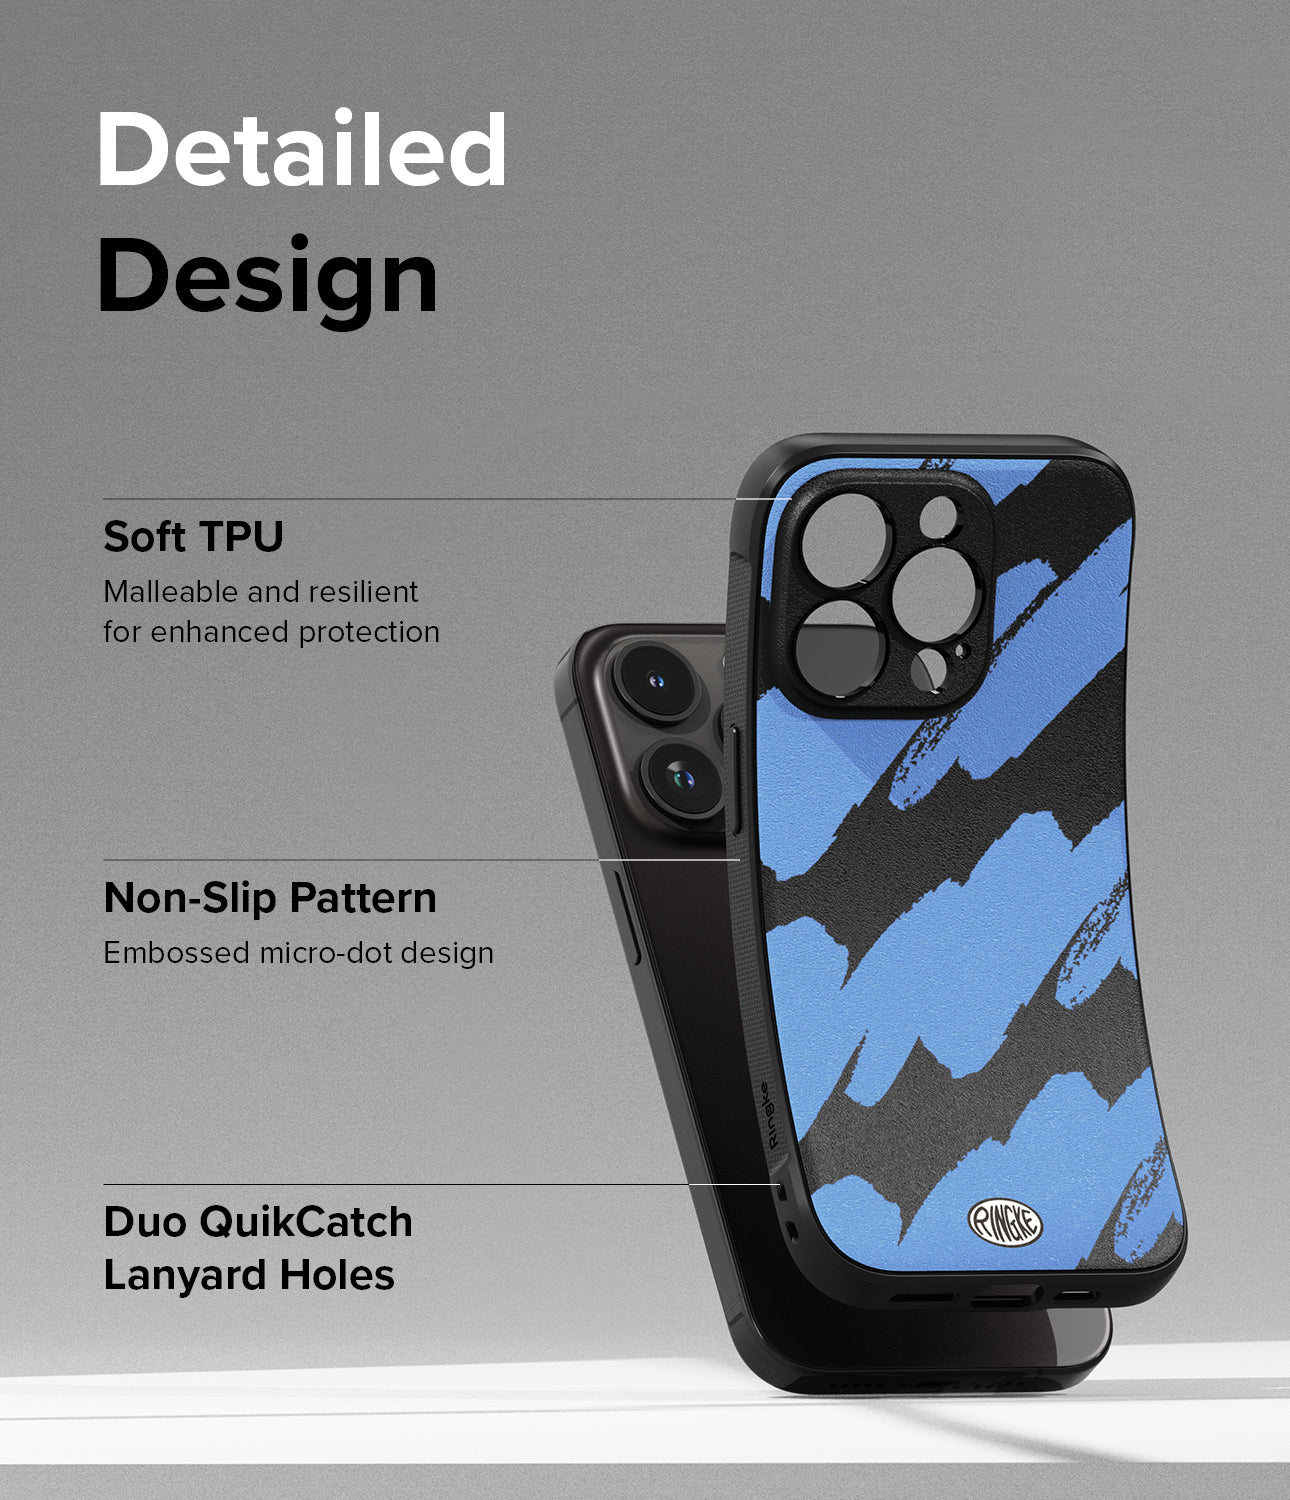 iPhone 15 Pro Case | Onyx Design - Blue Brush - Detailed Design. Malleable and resilient for enhanced protection with Soft TPU. Embossed micro-dot design with Non-Slip Pattern. Duo QuikCatch Lanyard Holes